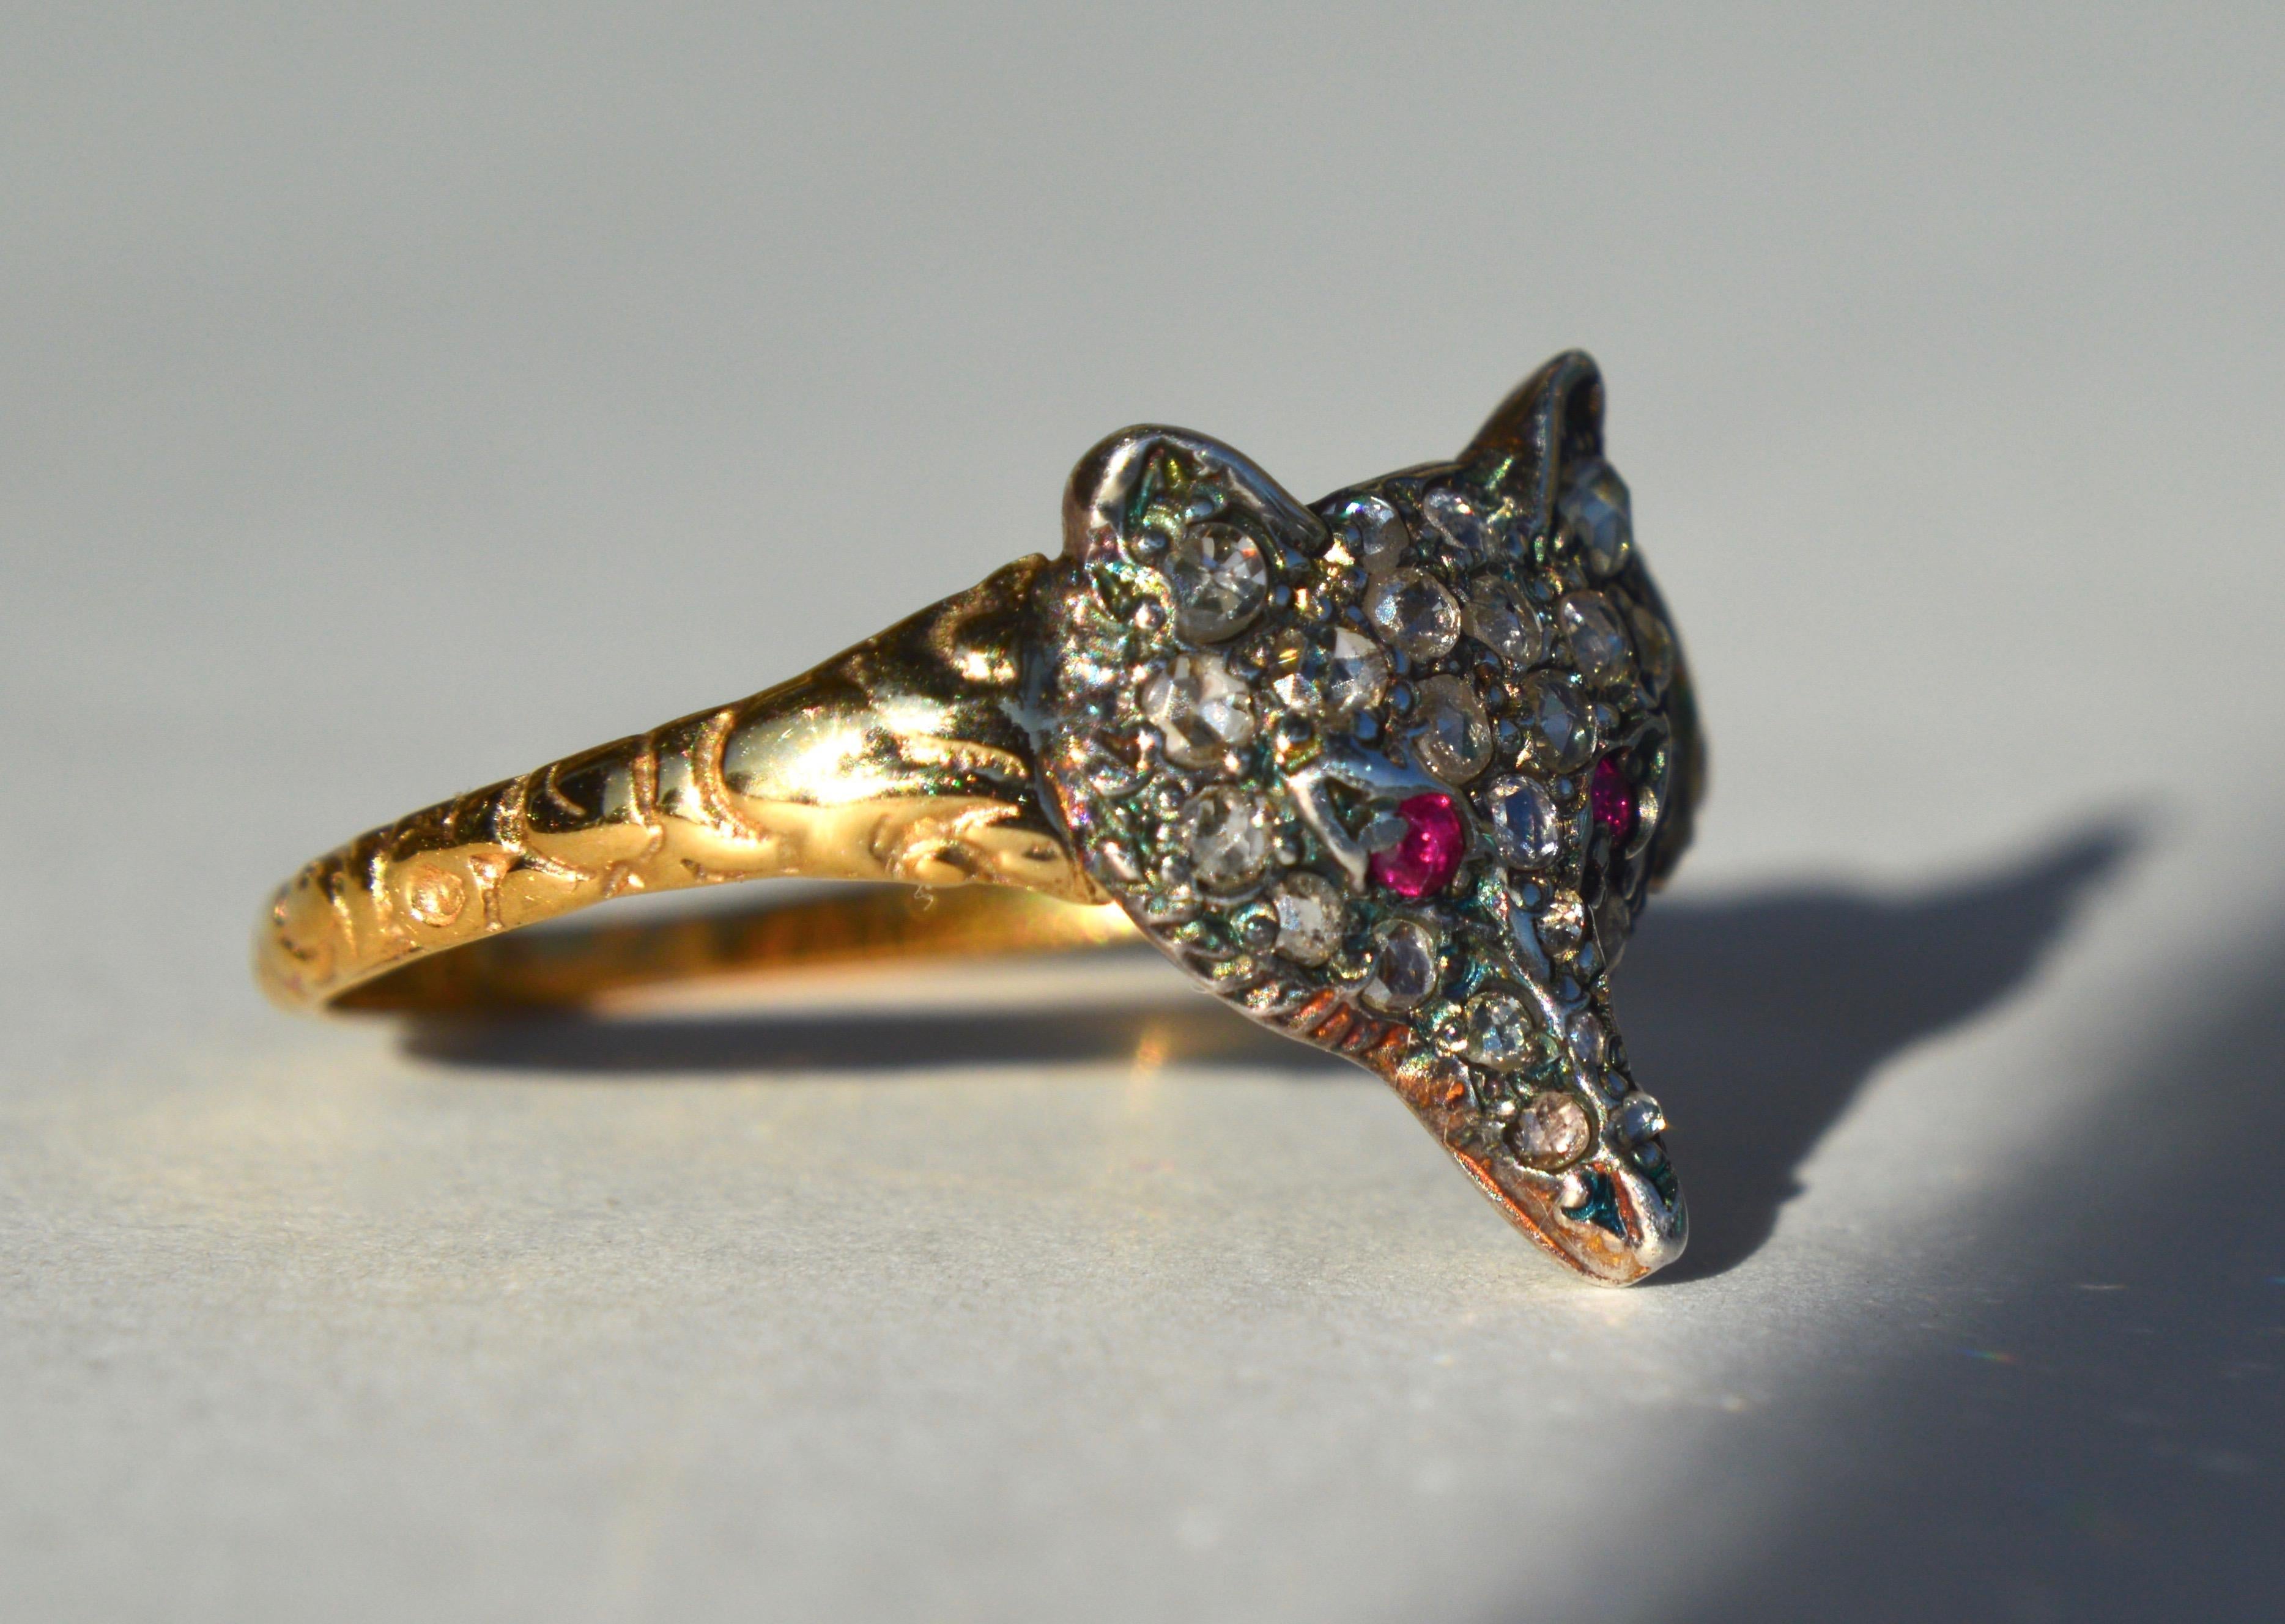 Gorgeous English origin Victorian era late 1800s 15K yellow gold with sparkling rosecut diamonds and natural ruby fox ring. Size 8.5, can be resized by a jeweler. Ring is unmarked but has been tested as solid 15K gold. Face of fox measures 12 x 13mm.